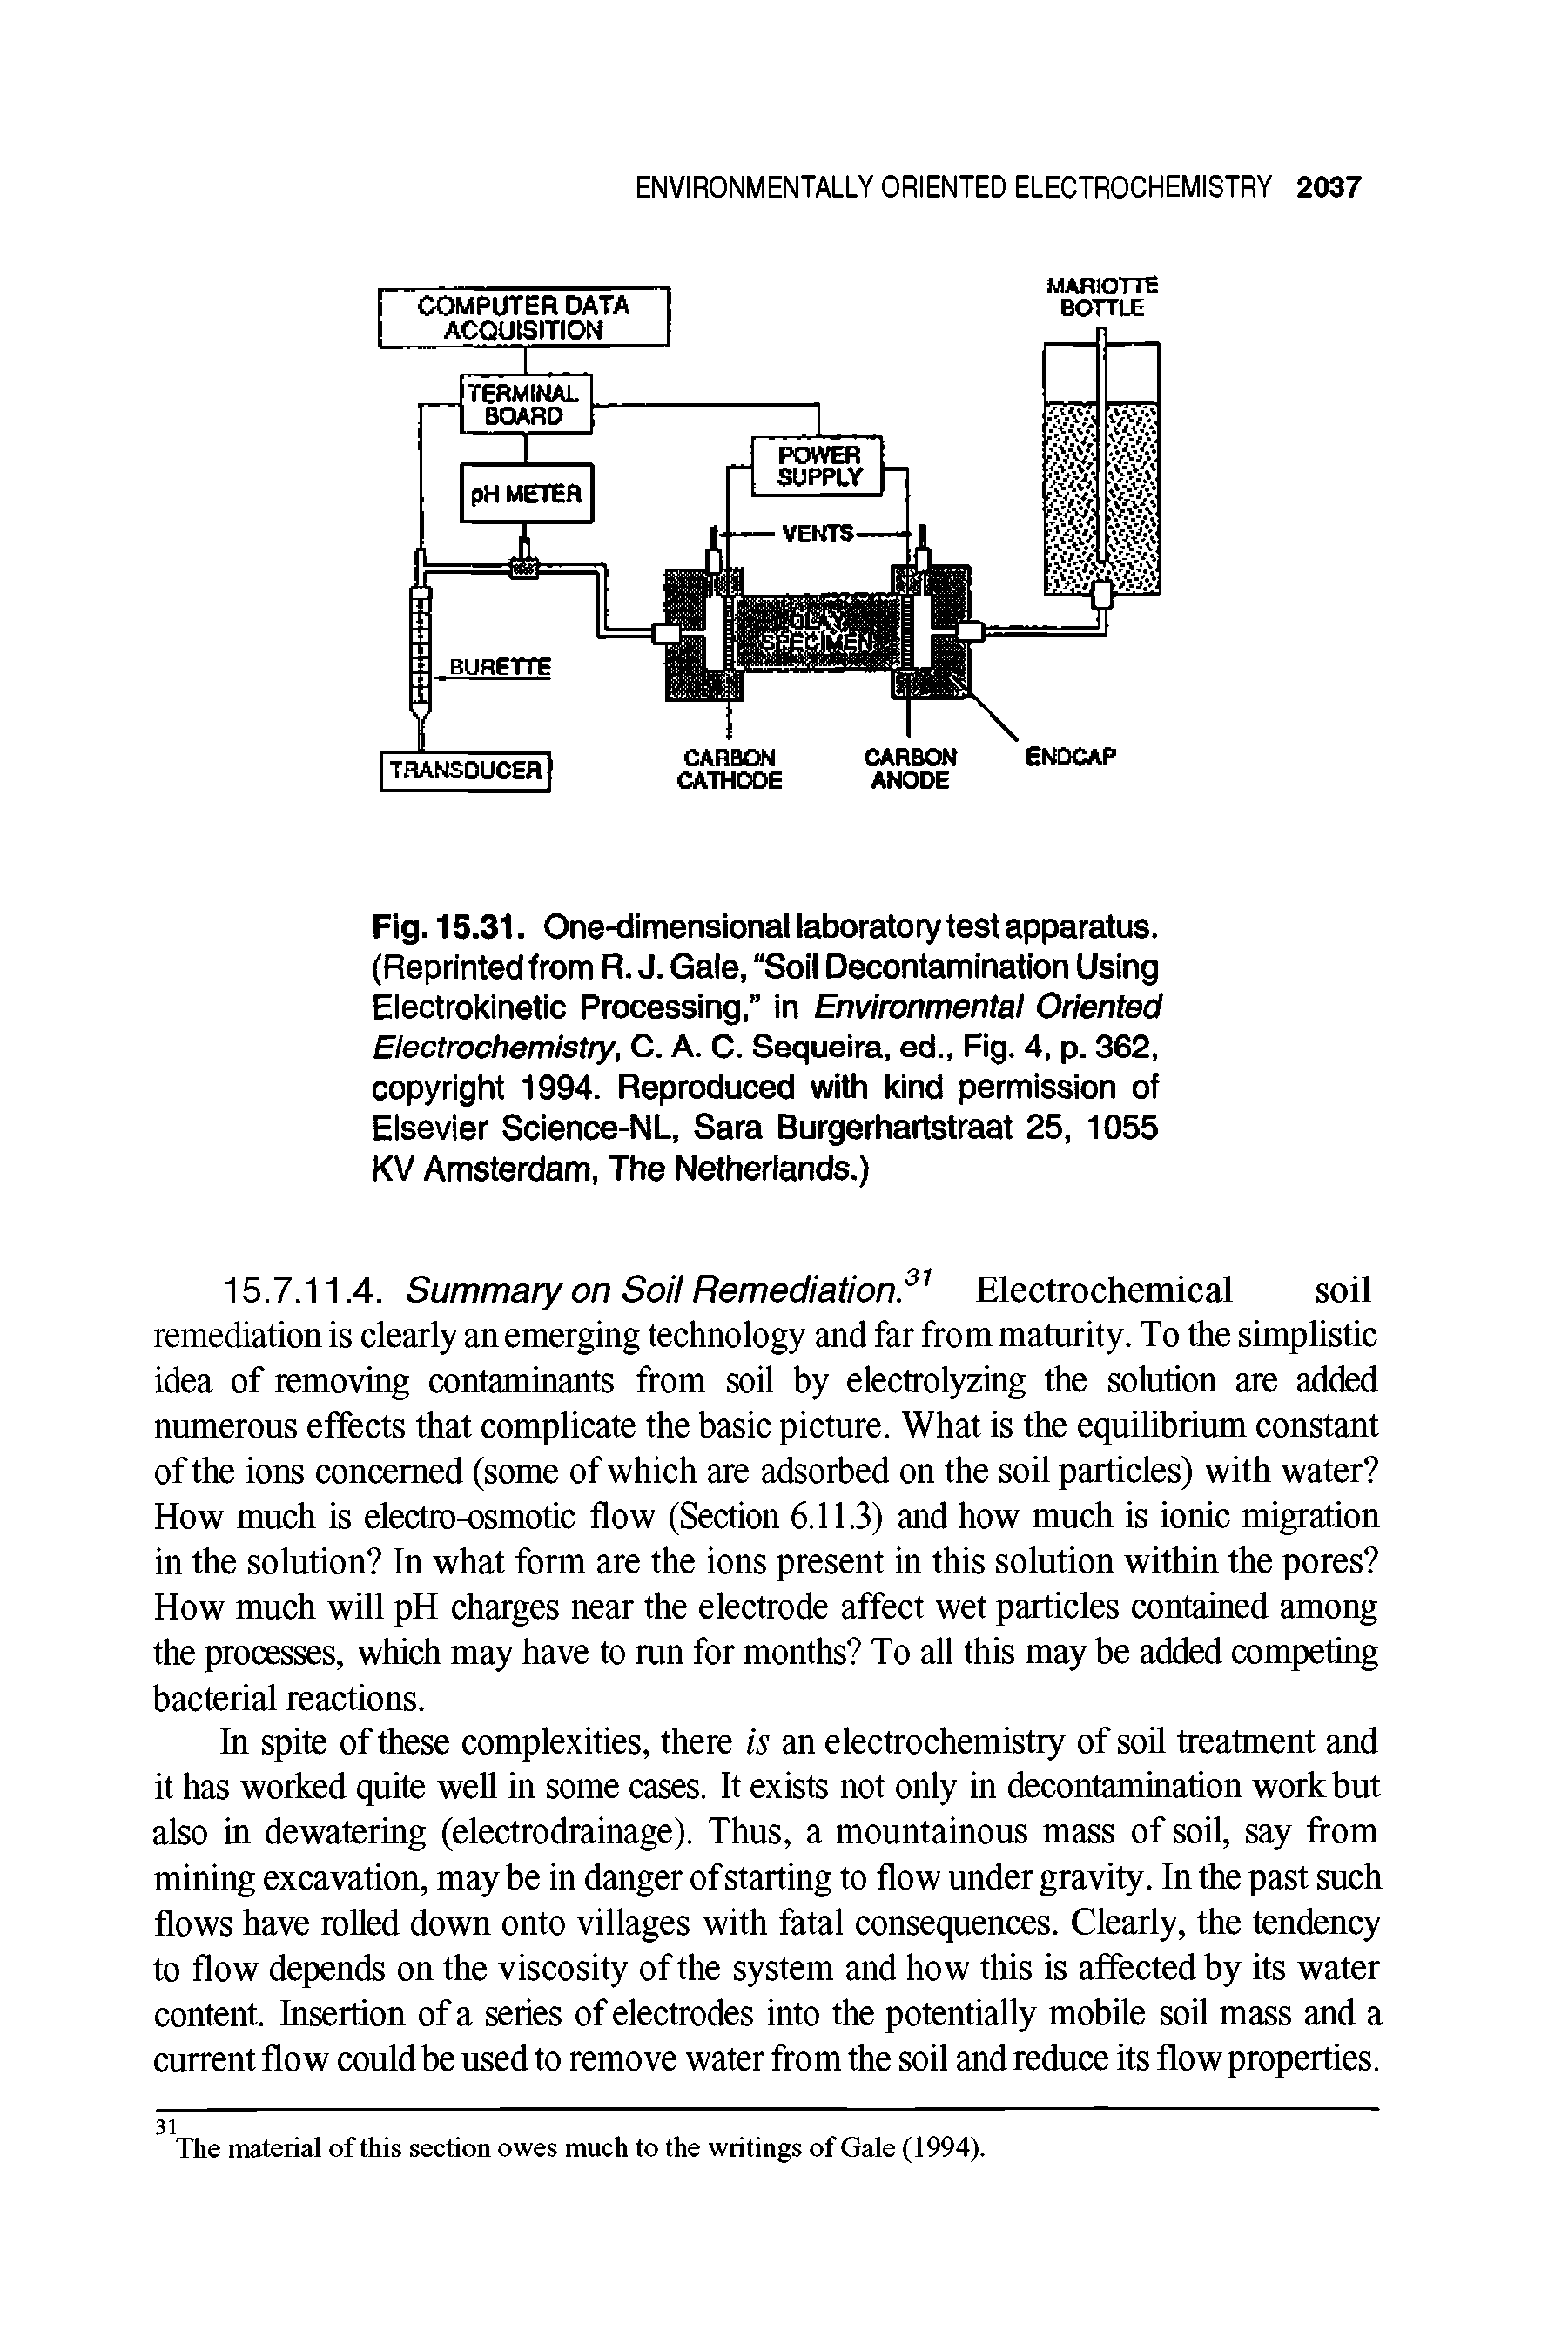 Fig. 15.31. One-dimensional laboratory test apparatus. (Reprinted from R. J. Gale, Soil Decontamination Using Electrokinetic Processing, in Environmental Oriented Electrochemistry, C. A. C. Sequeira, ed., Fig. 4, p. 362, copyright 1994. Reproduced with kind permission of Elsevier Science-NL, Sara Burgerhartstraat 25, 1055 KV Amsterdam, The Netherlands.)...